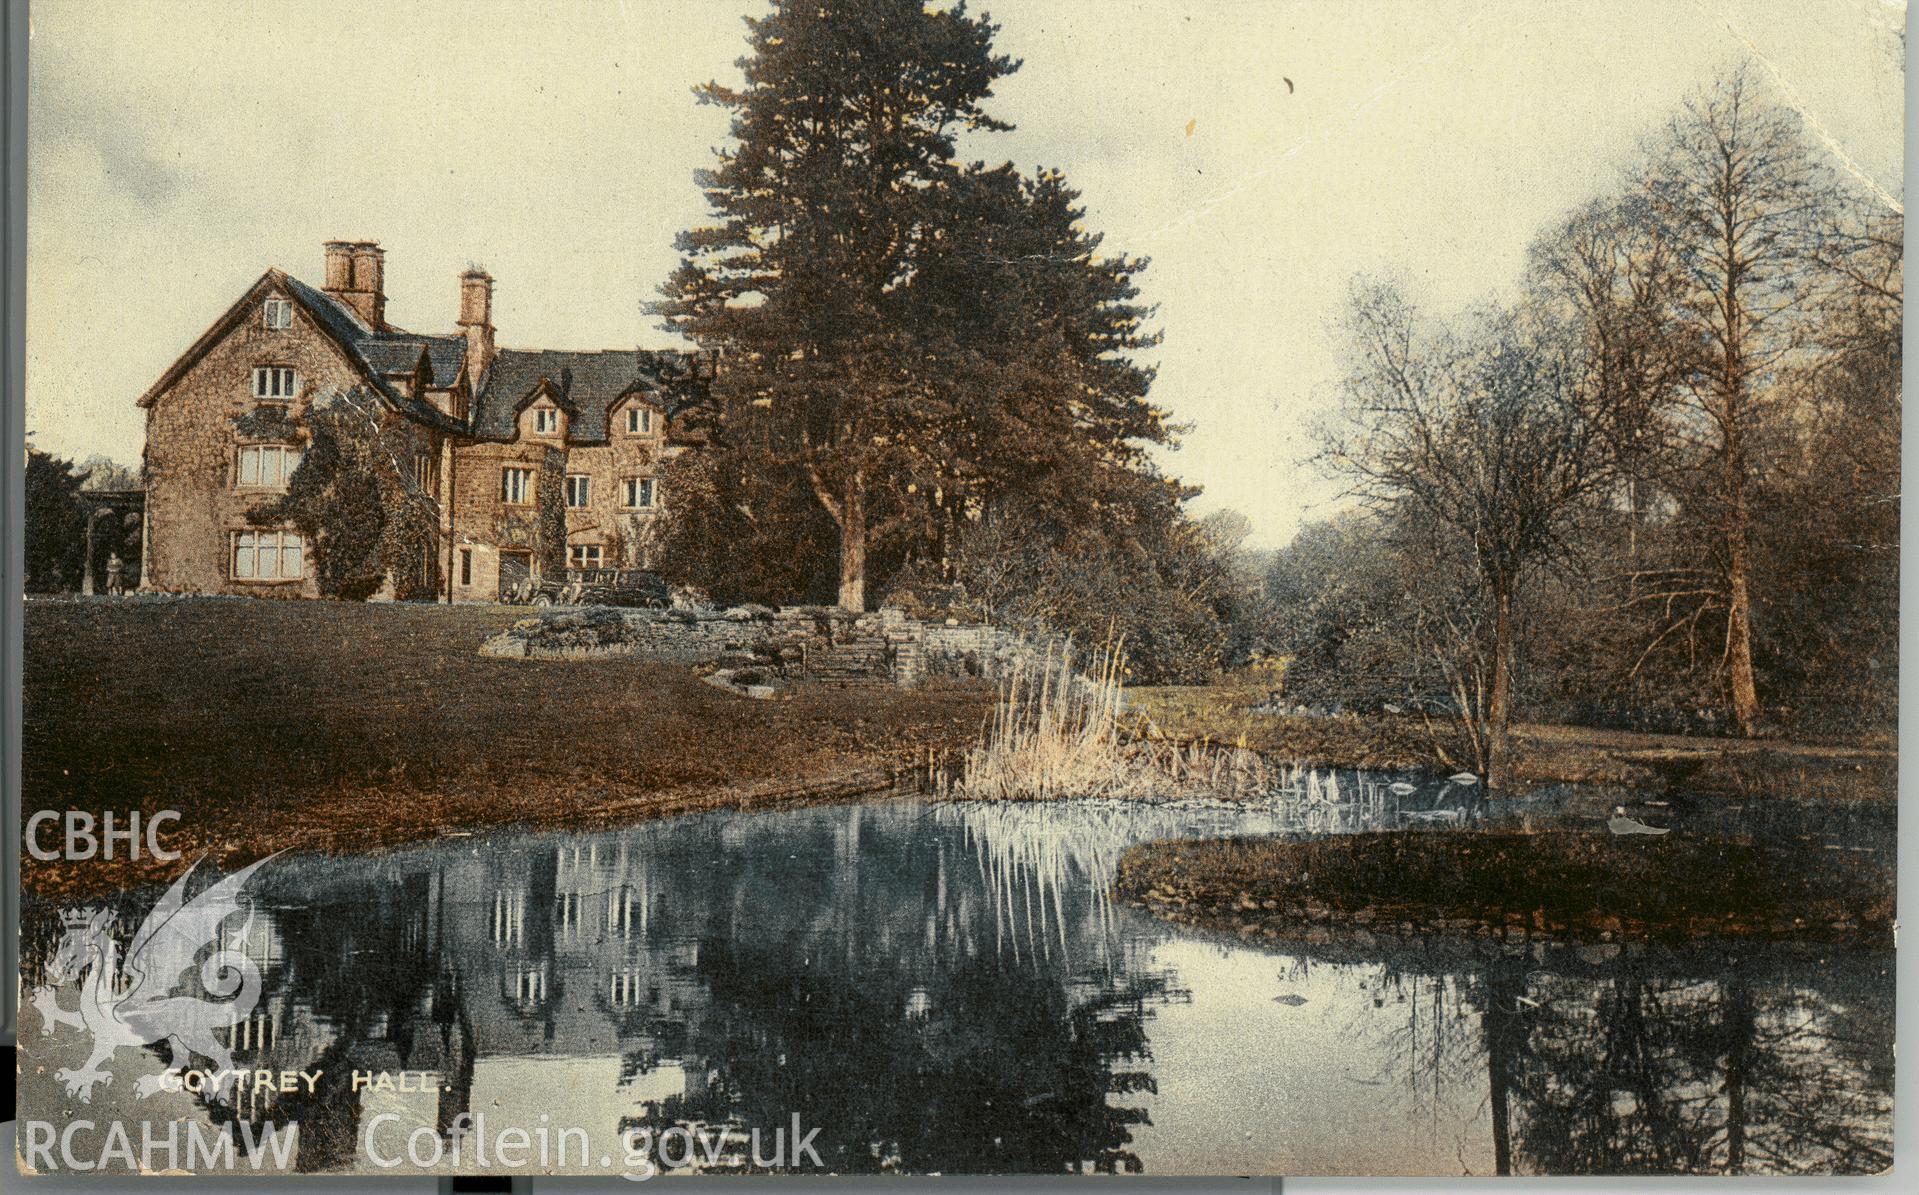 Digitised postcard image of Goetre Hall, Monmouthshire, the R.A.P. Co. Ltd. Produced by Parks and Gardens Data Services, from an original item in the Peter Davis Collection at Parks and Gardens UK. We hold only web-resolution images of this collection, suitable for viewing on screen and for research purposes only. We do not hold the original images, or publication quality scans.